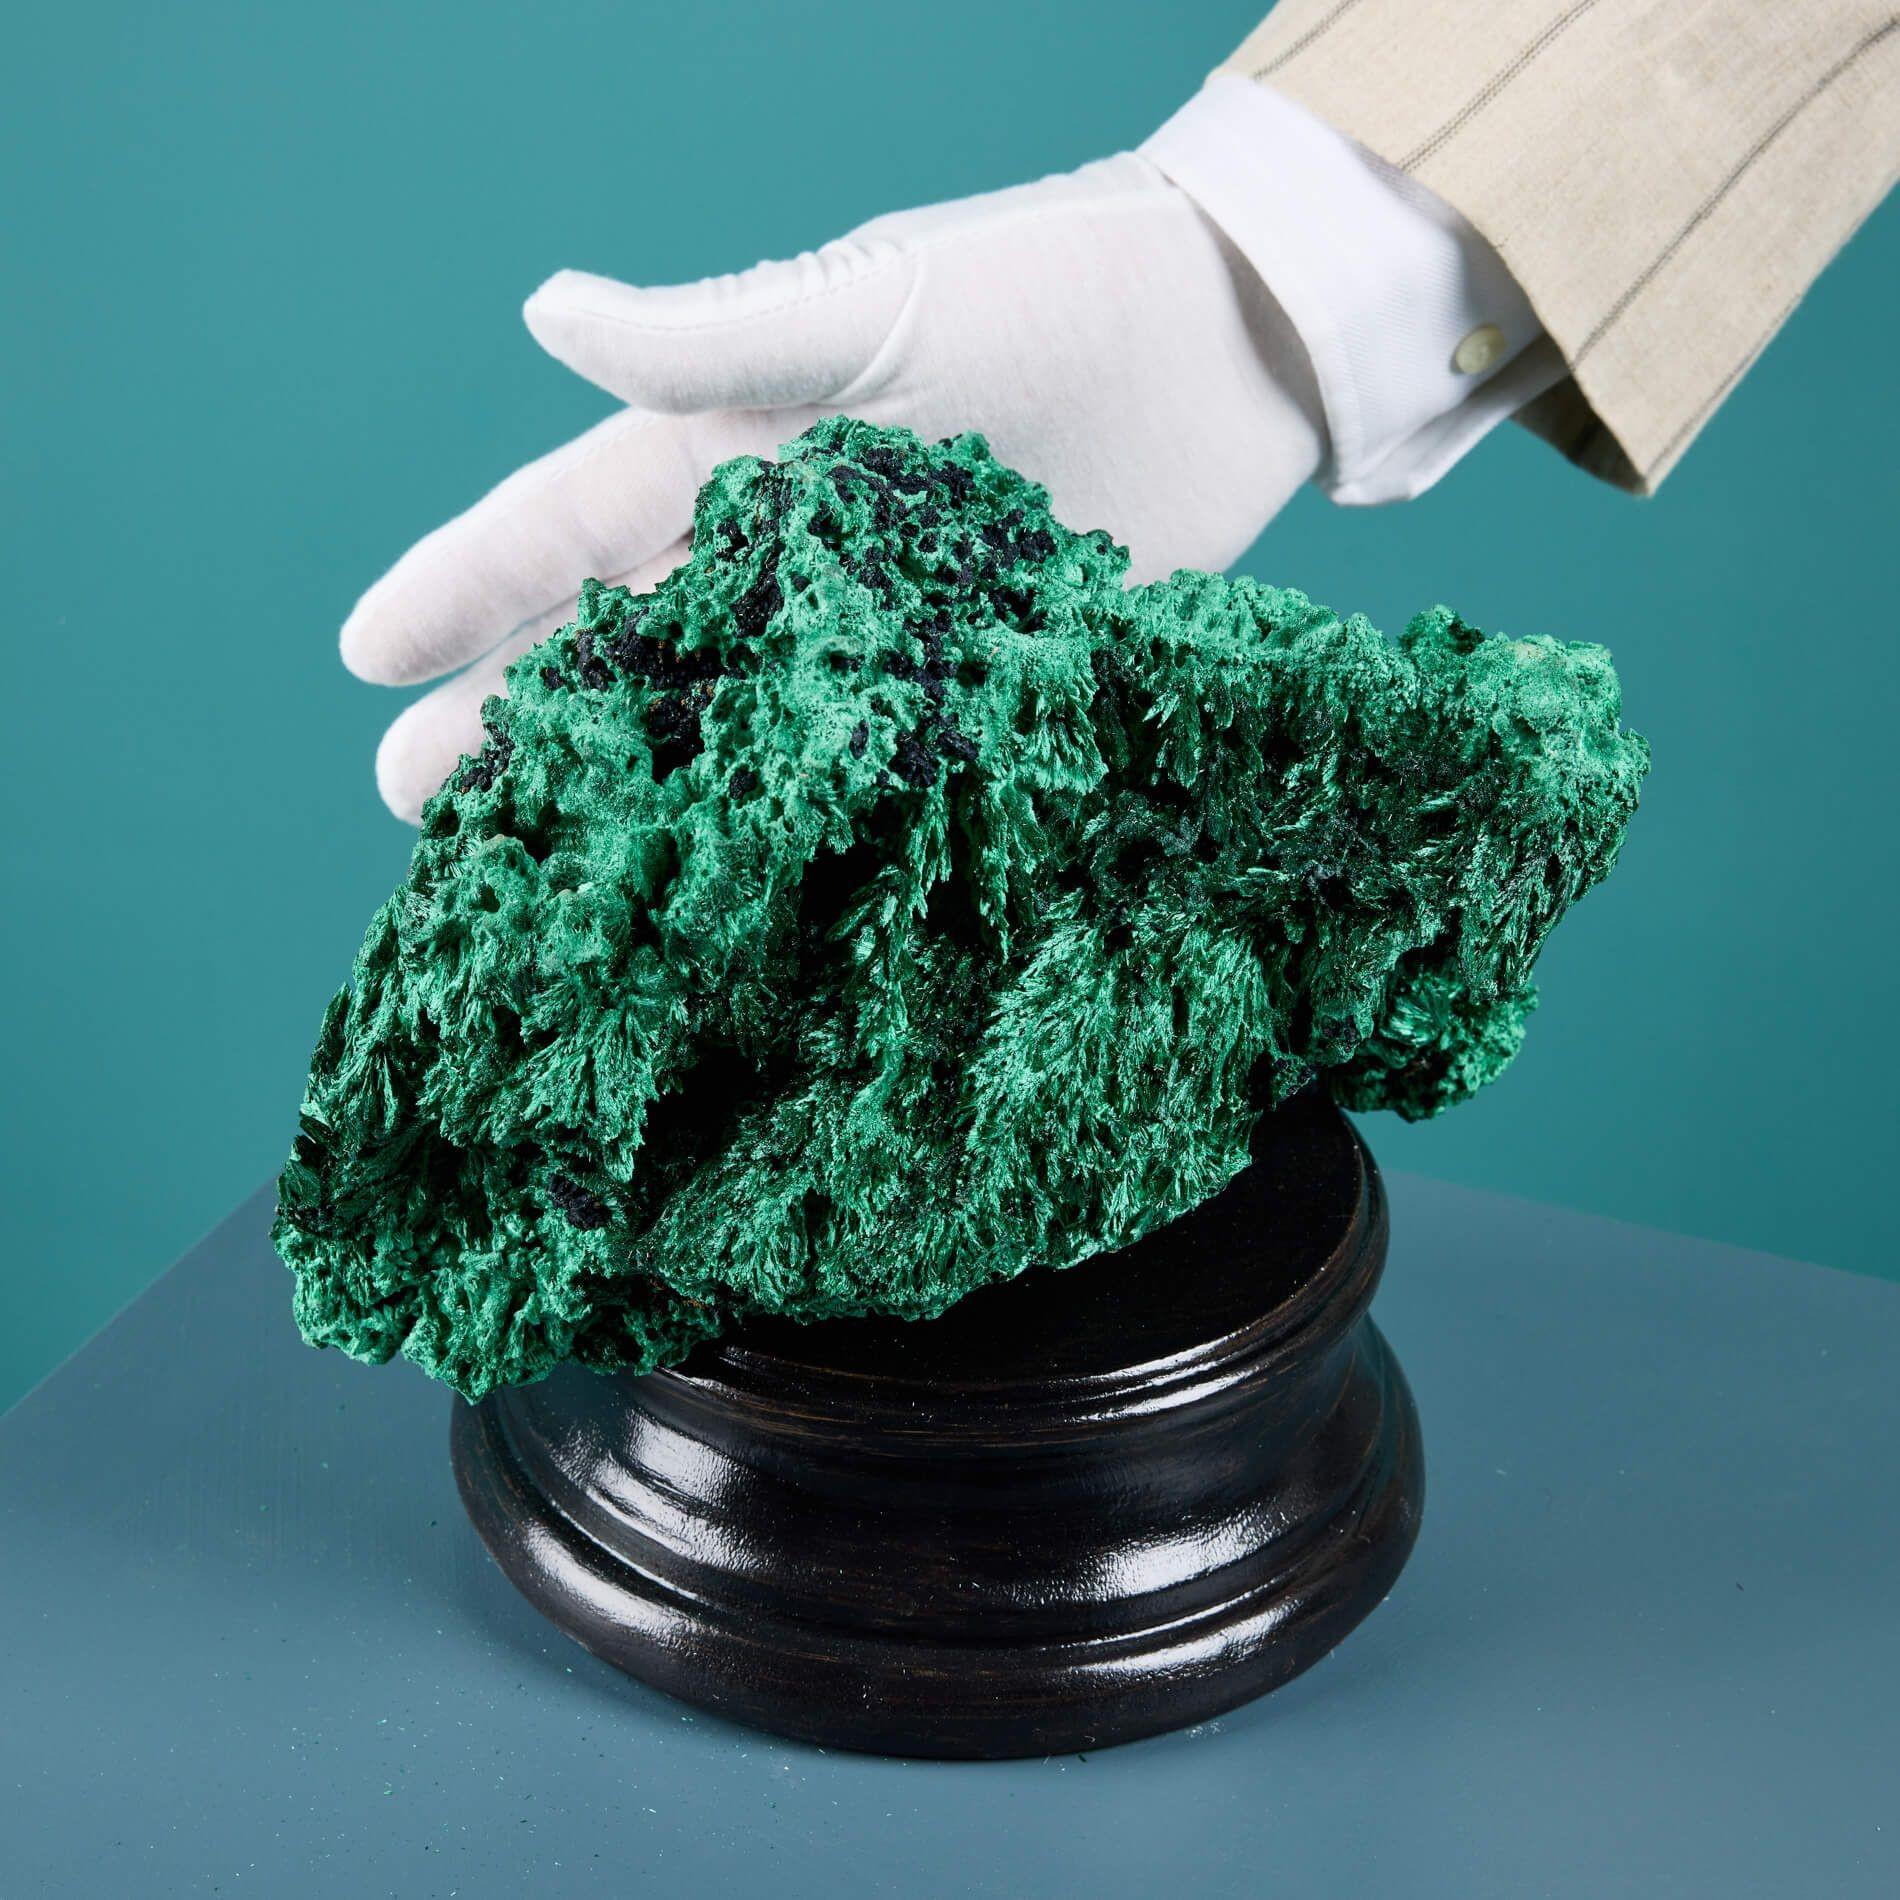 A large natural silky or fibrous malachite originating from Congo. Silky Malachite, which is a copper ore, is known for its rosette crystalline formation, and are often sparkling in appearance.

This exceptional mineral has a striking form that has